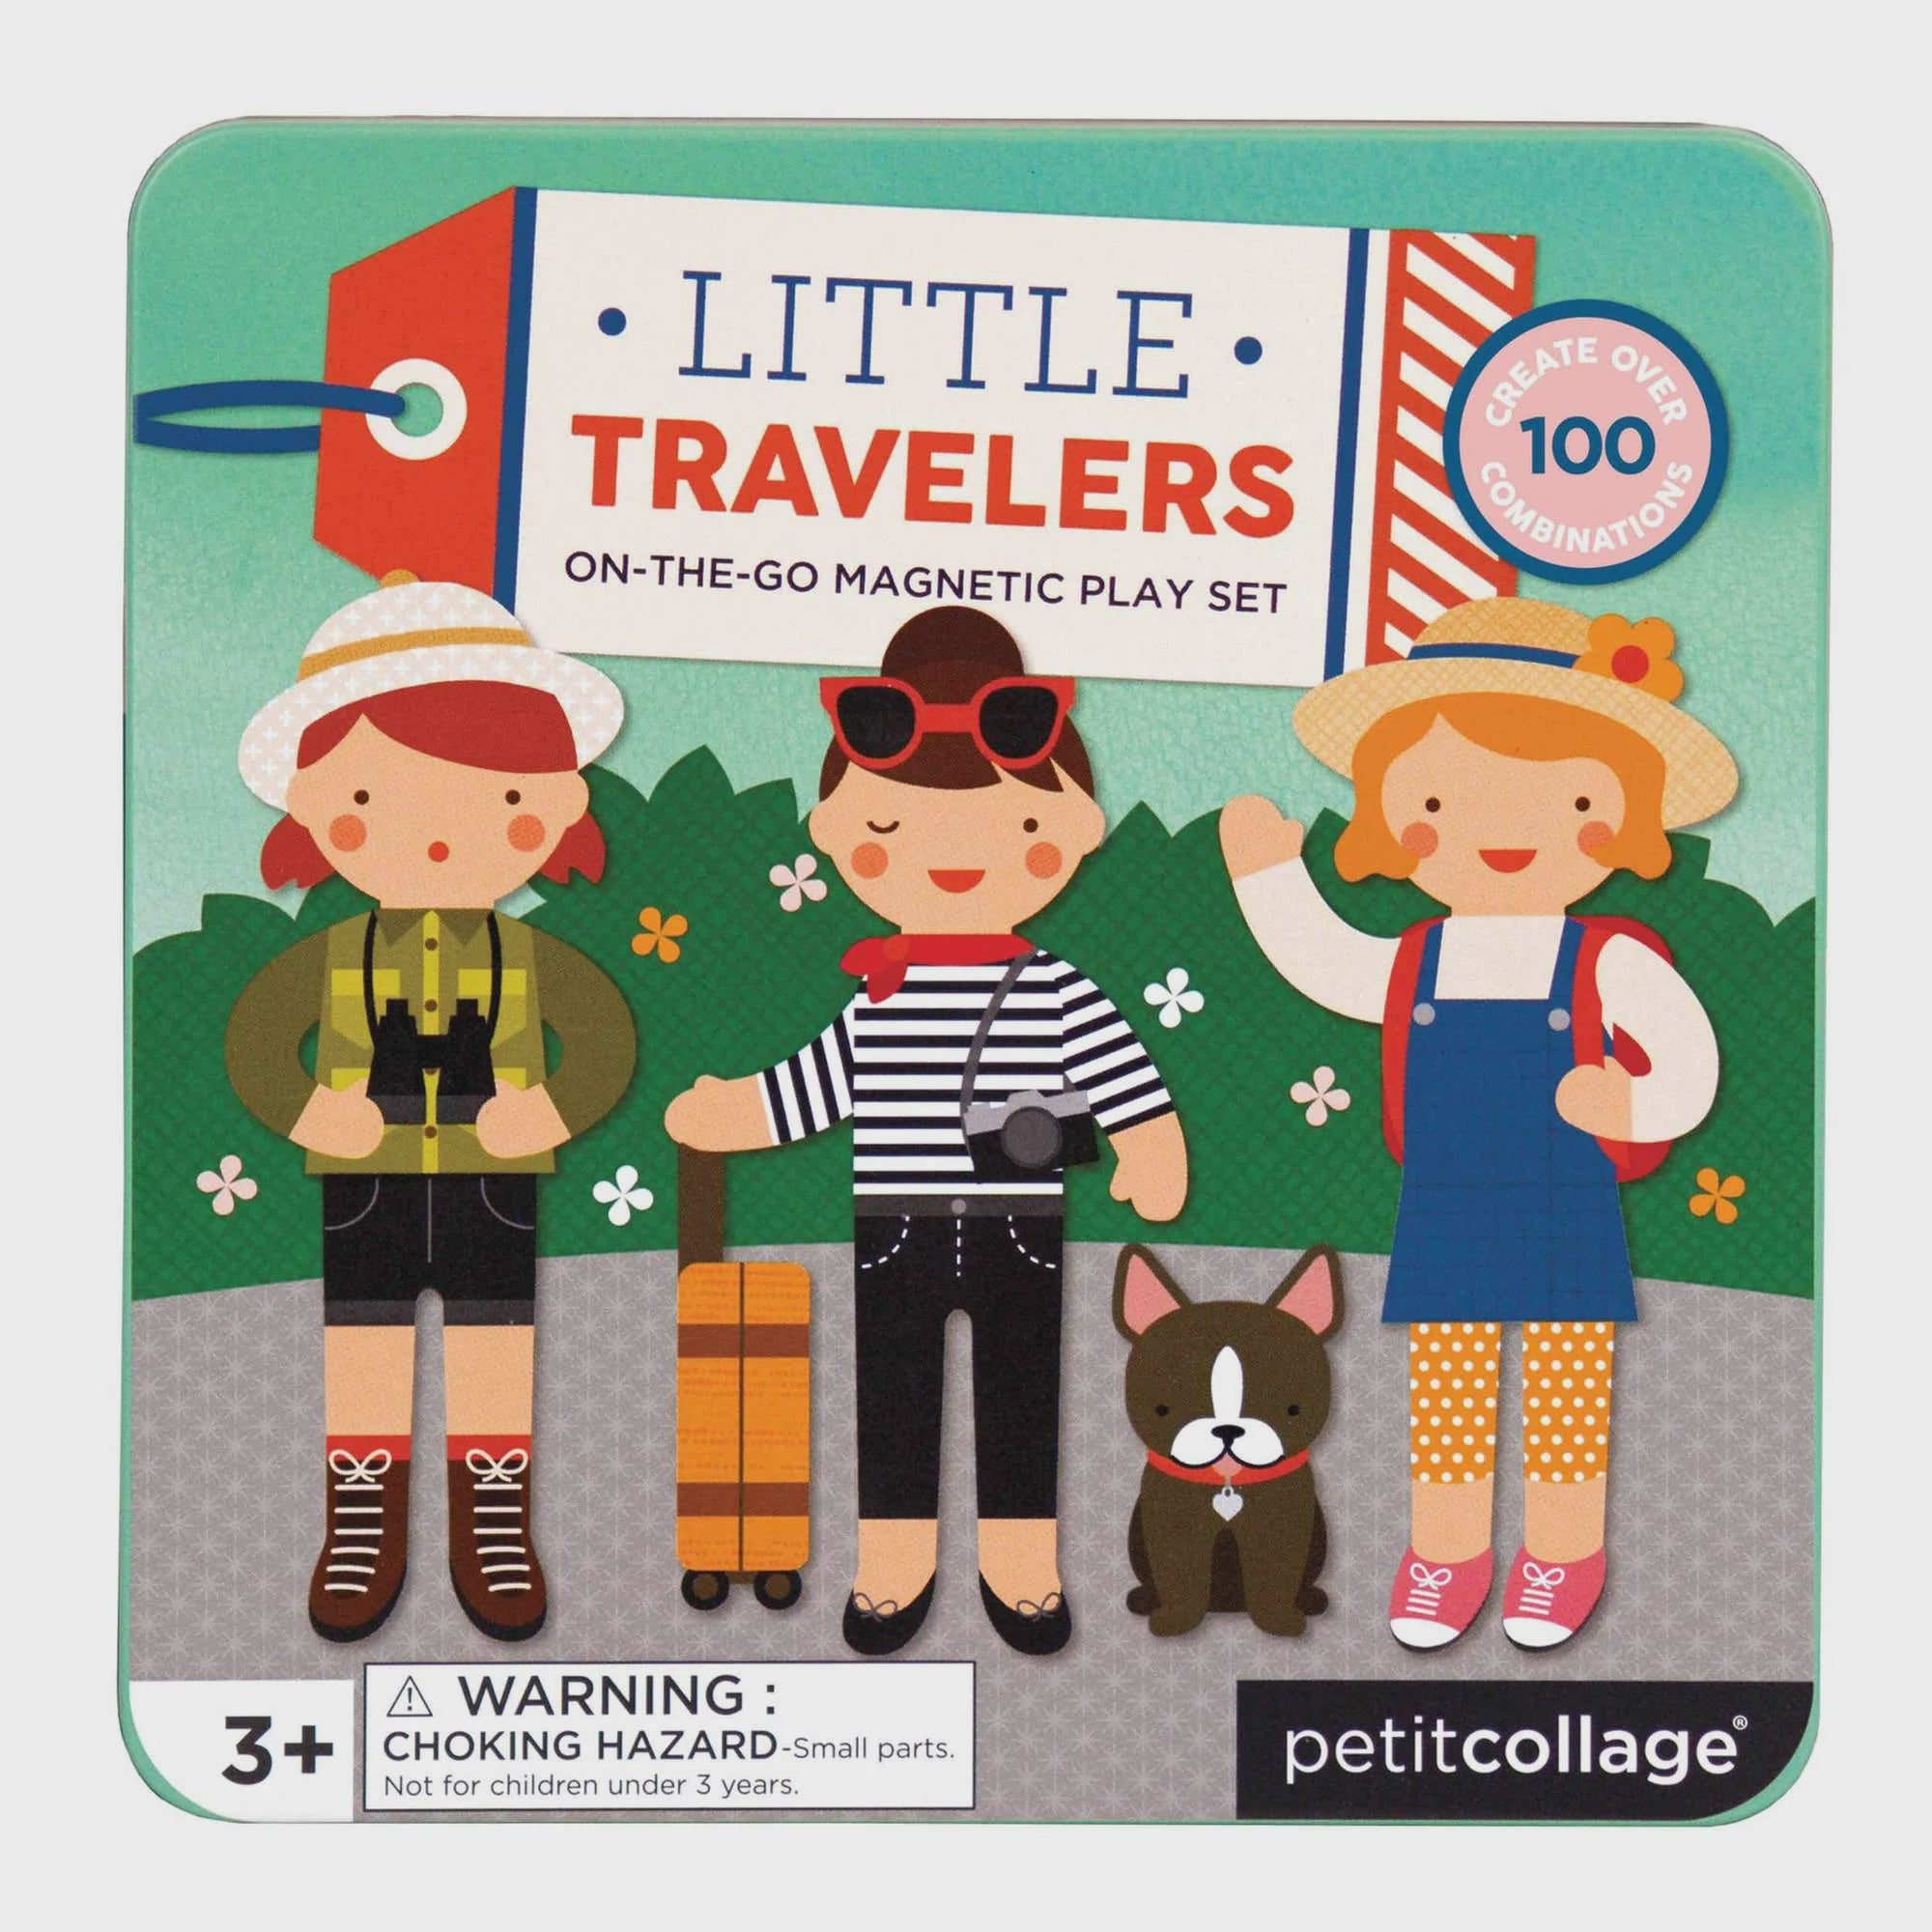 On-The-Go Magnetic Play set - Little Travellers